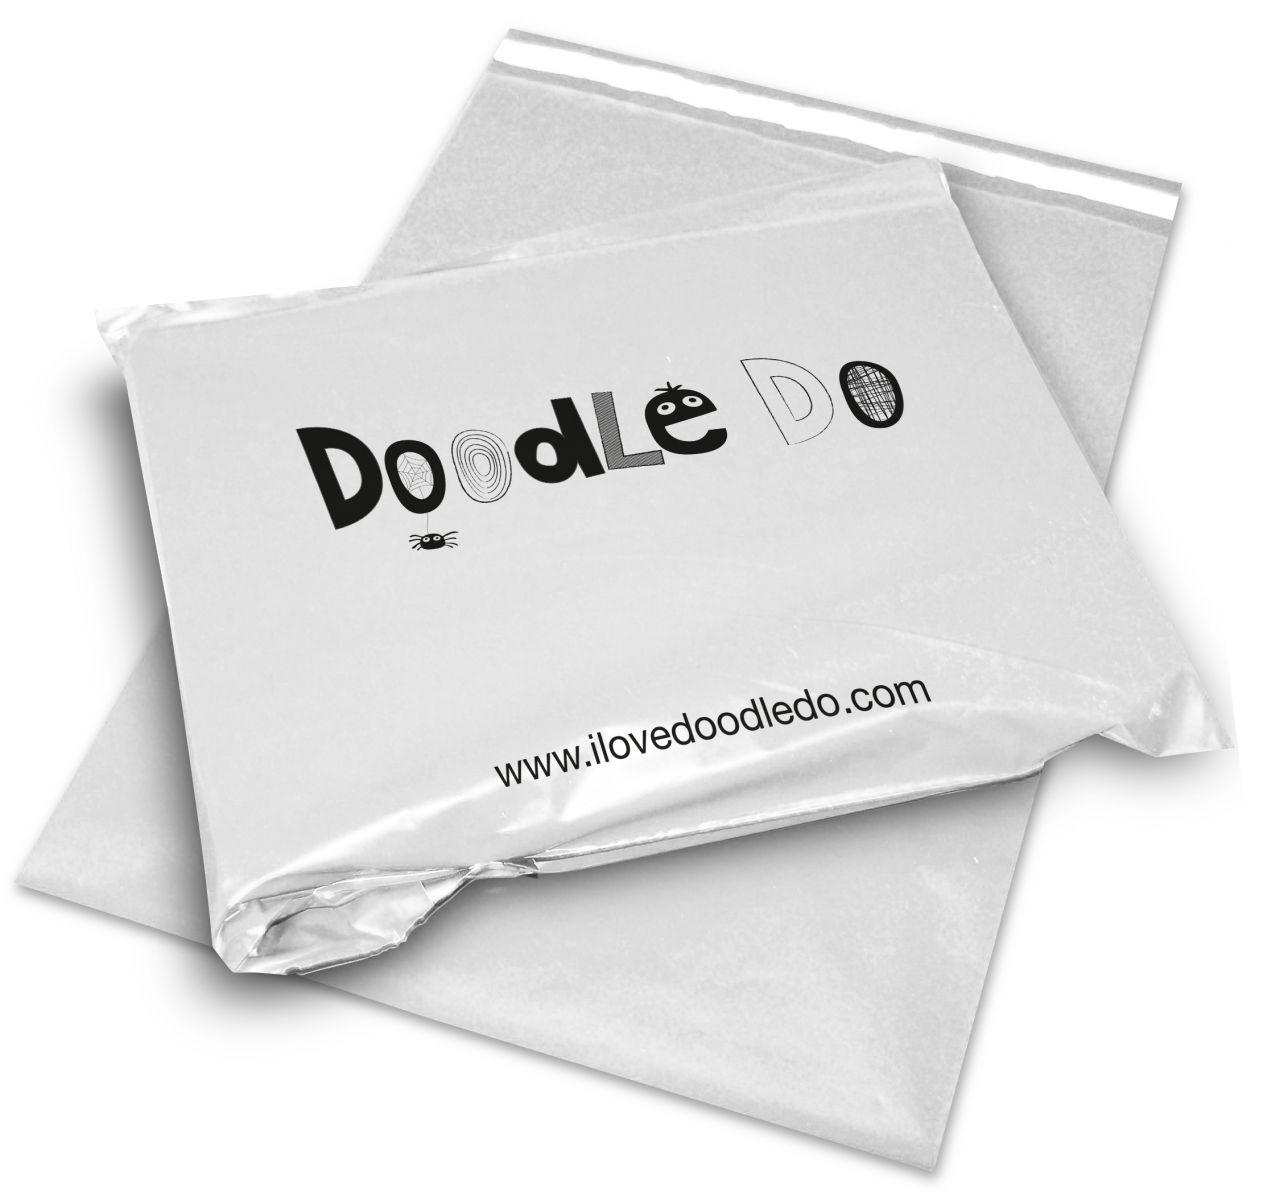 Black and White Mail Logo - Printed Mailing Bags. Minimum Quantity of Just 500 Bags!